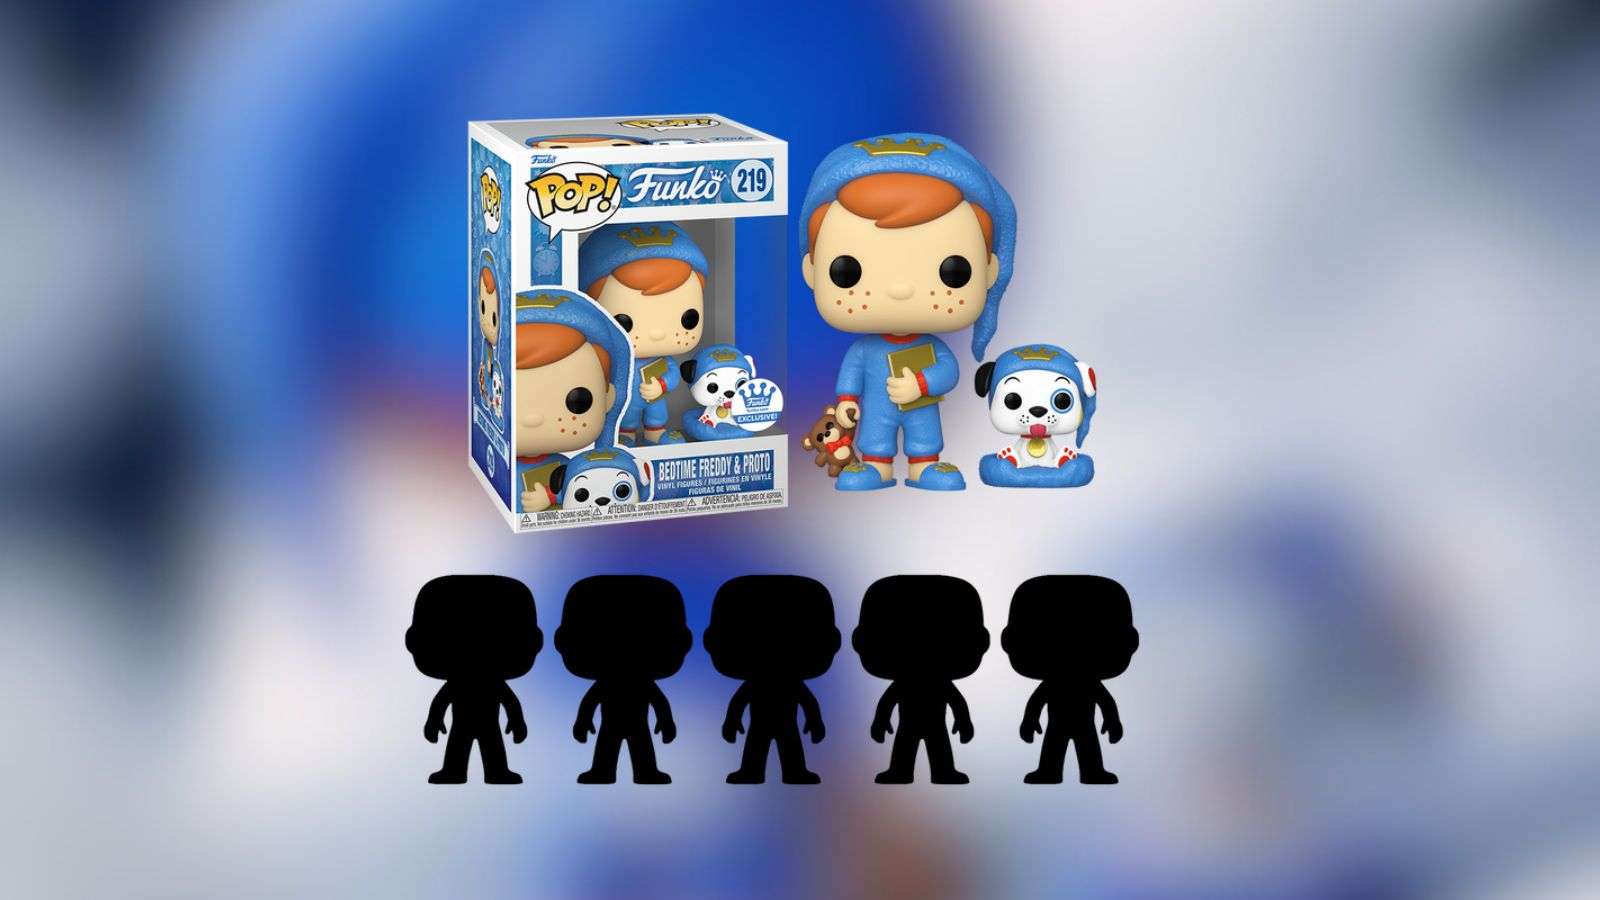 The Cyber Monday Freddy Funko All-Exclusives Mystery Box